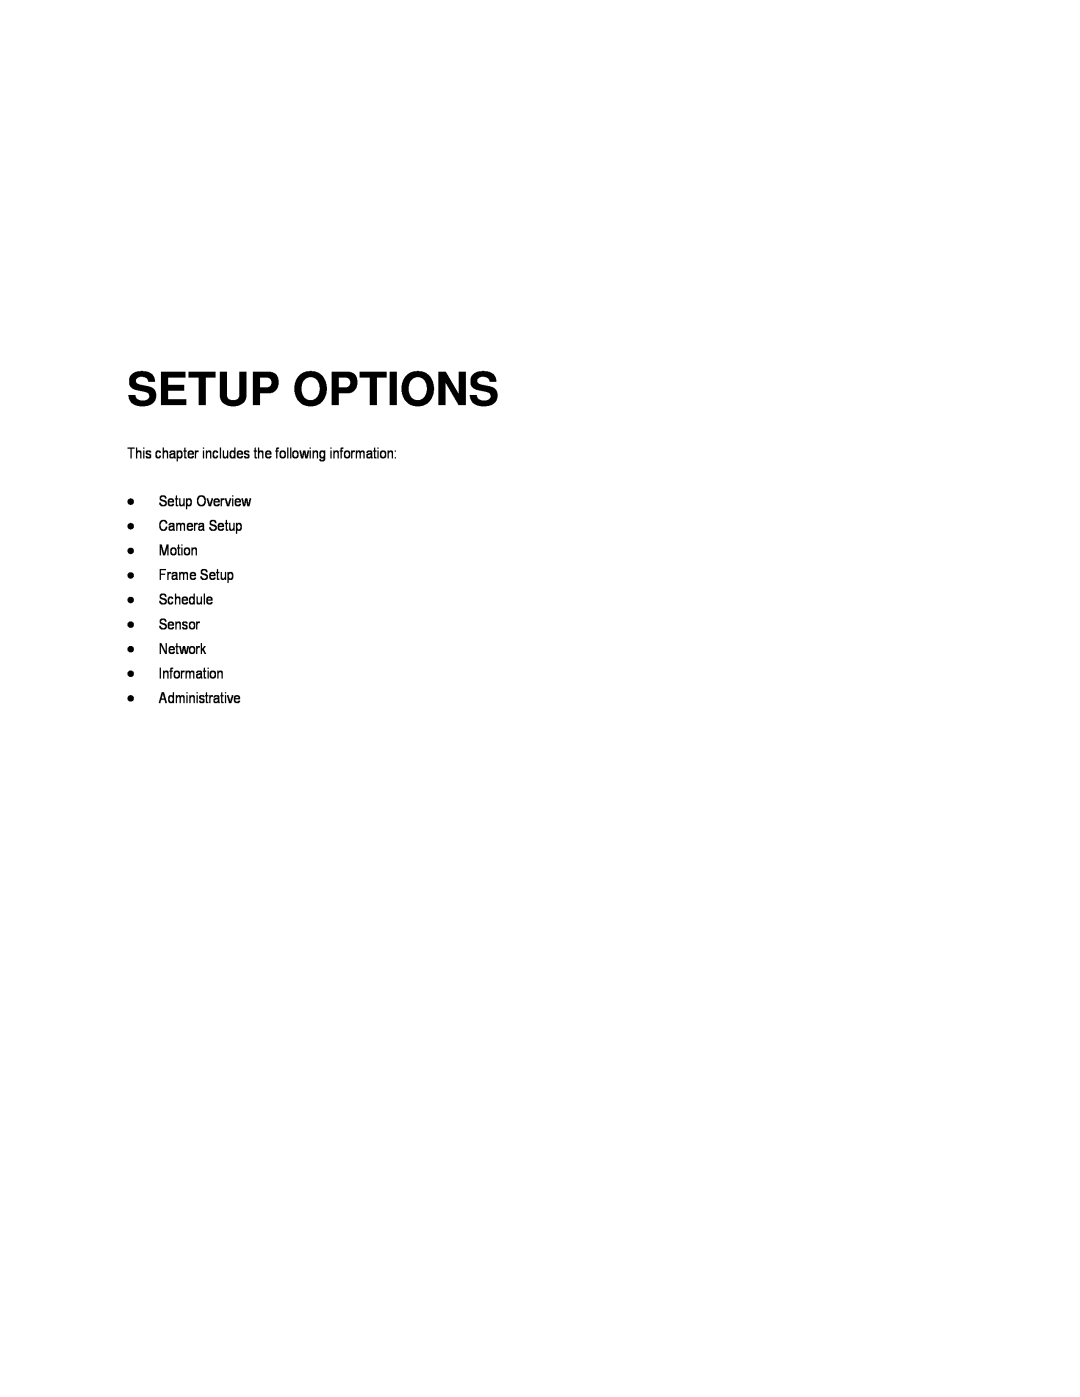 Toshiba EVR16-X, EVR8-X Setup Options, This chapter includes the following information Setup Overview, Administrative 